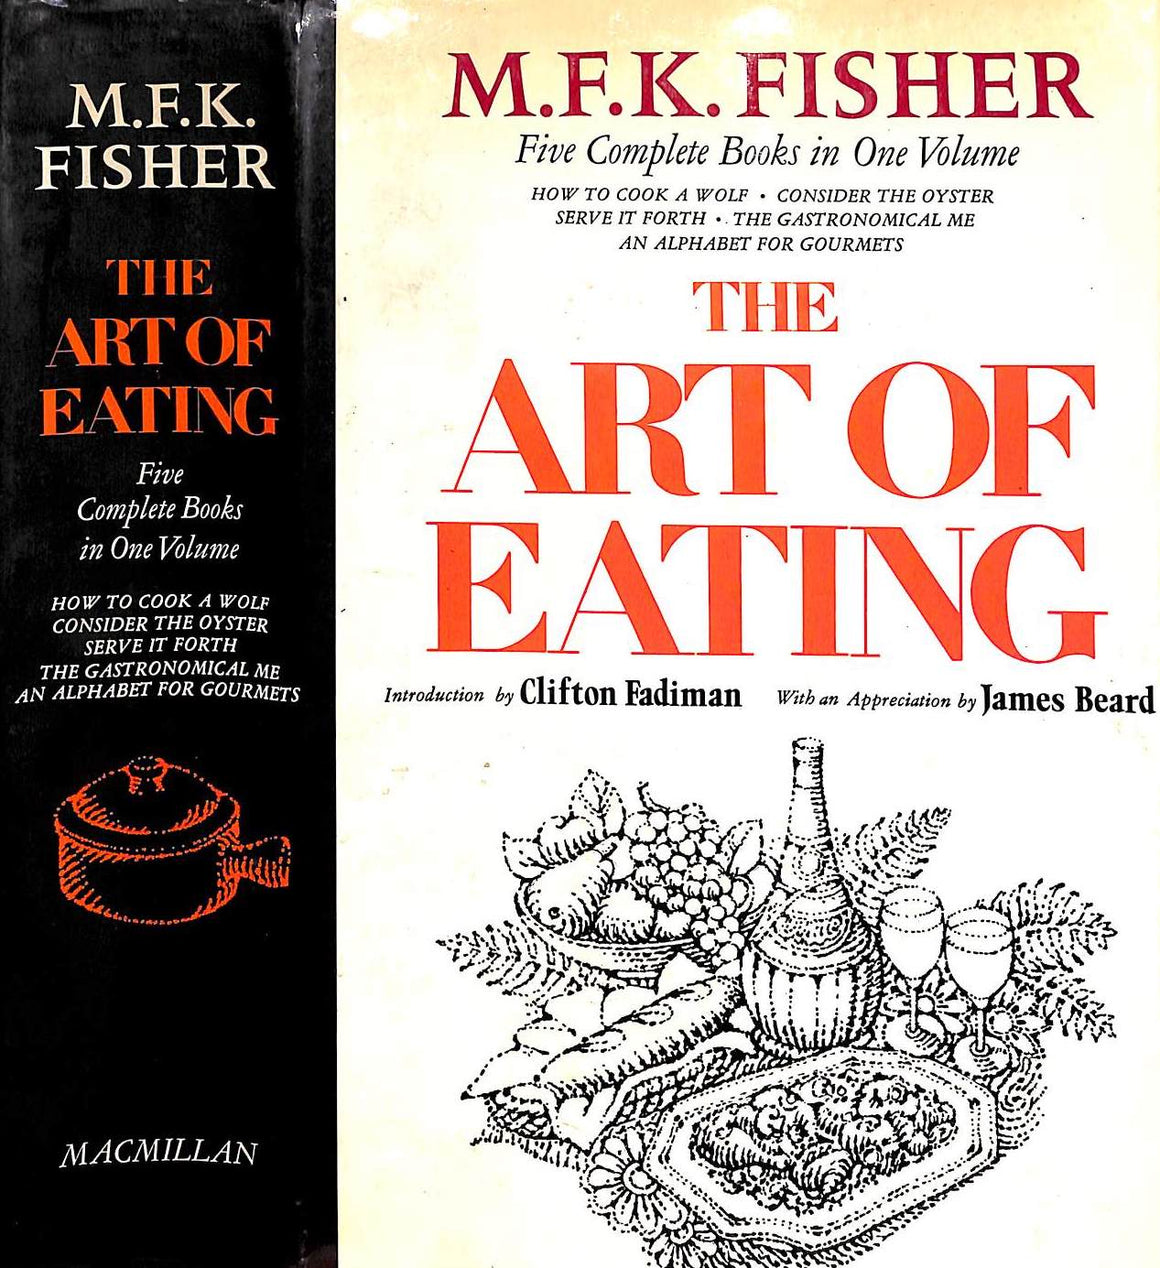 "The Art Of Eating" 1954 FISHER, M.F.K.